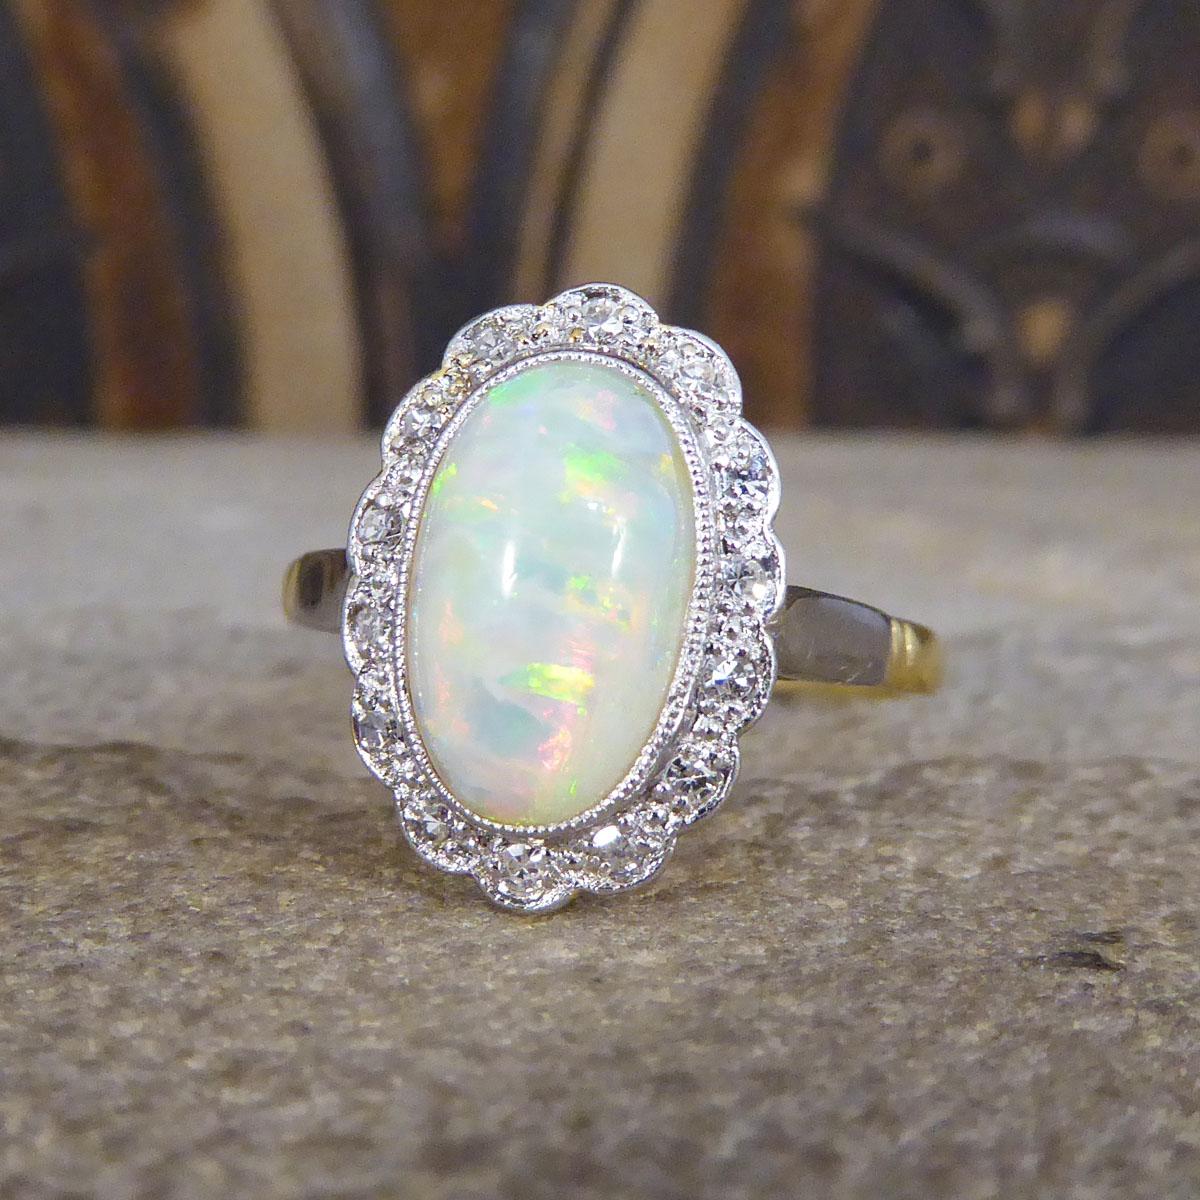 Oval Cut Antique Edwardian Opal and Diamond Cluster Ring in 18ct Yellow Gold and Platinum